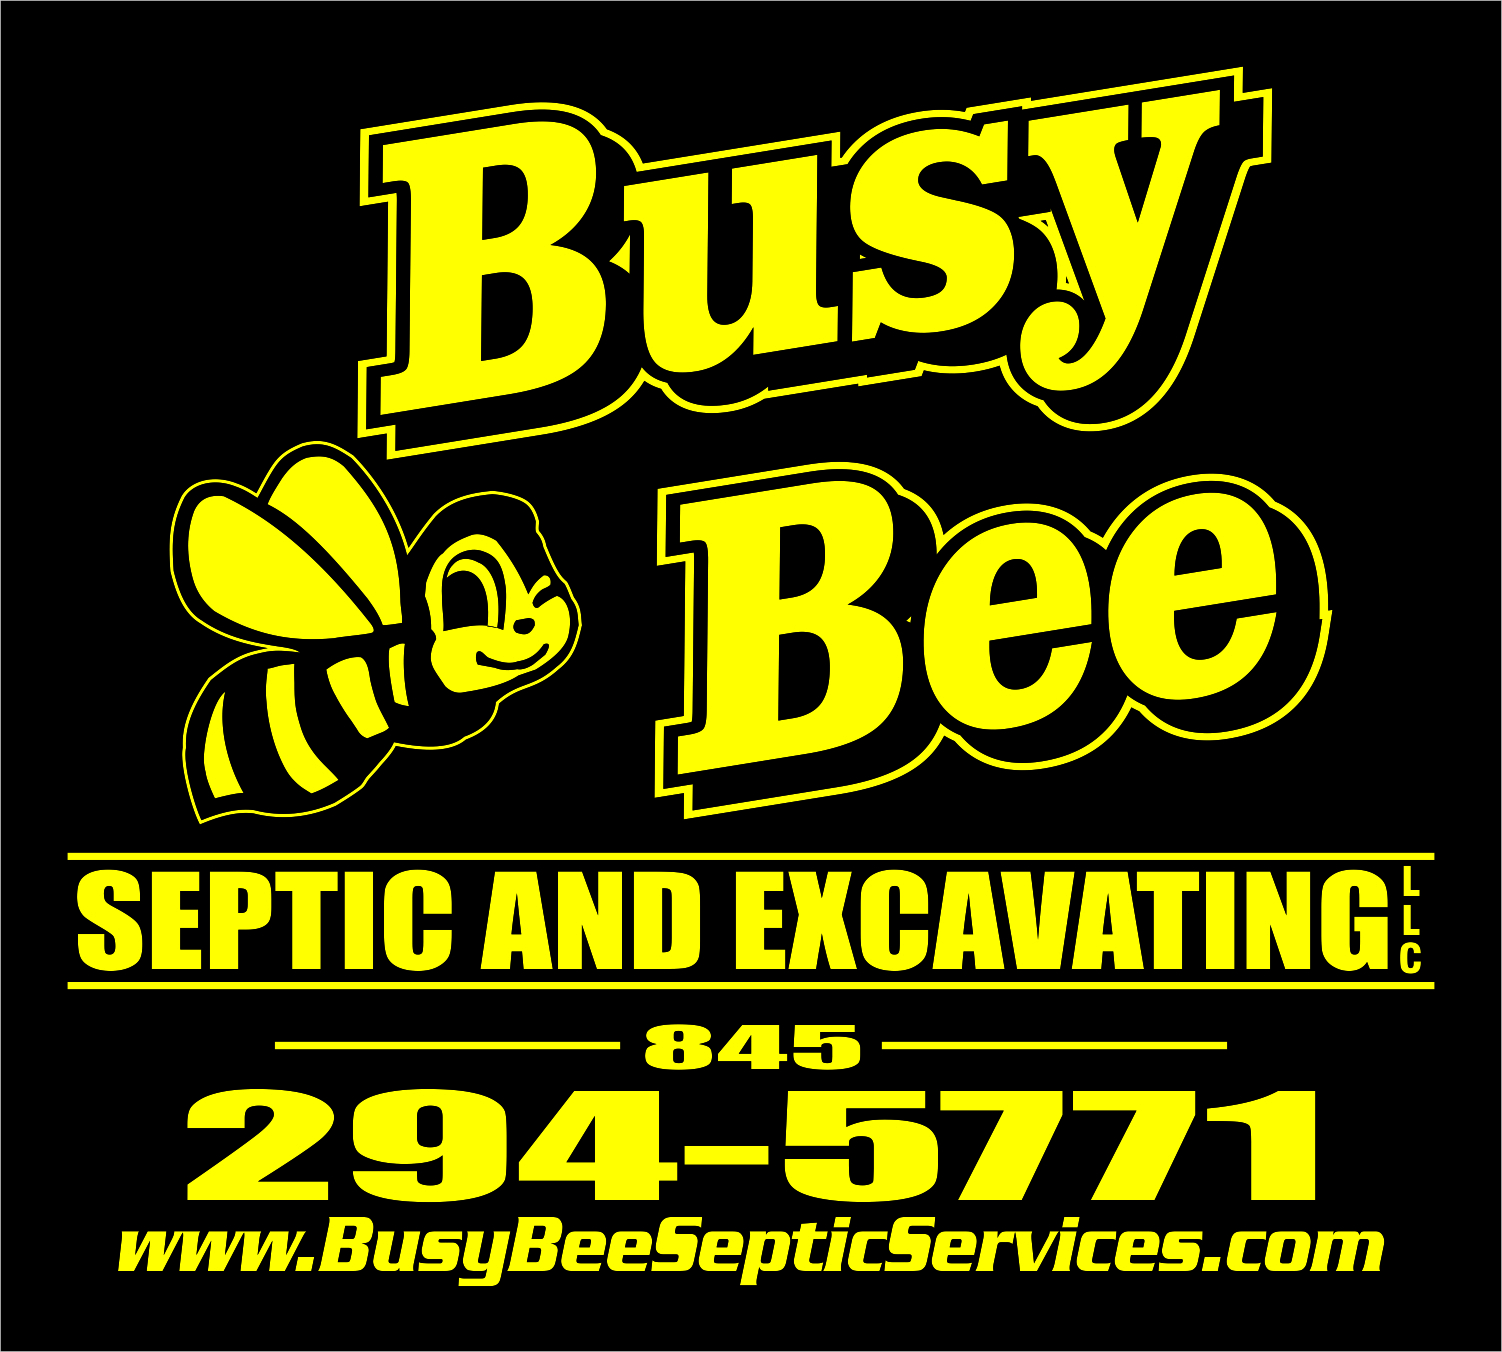 Busy Bee Septic and Excavating LLC's Logo